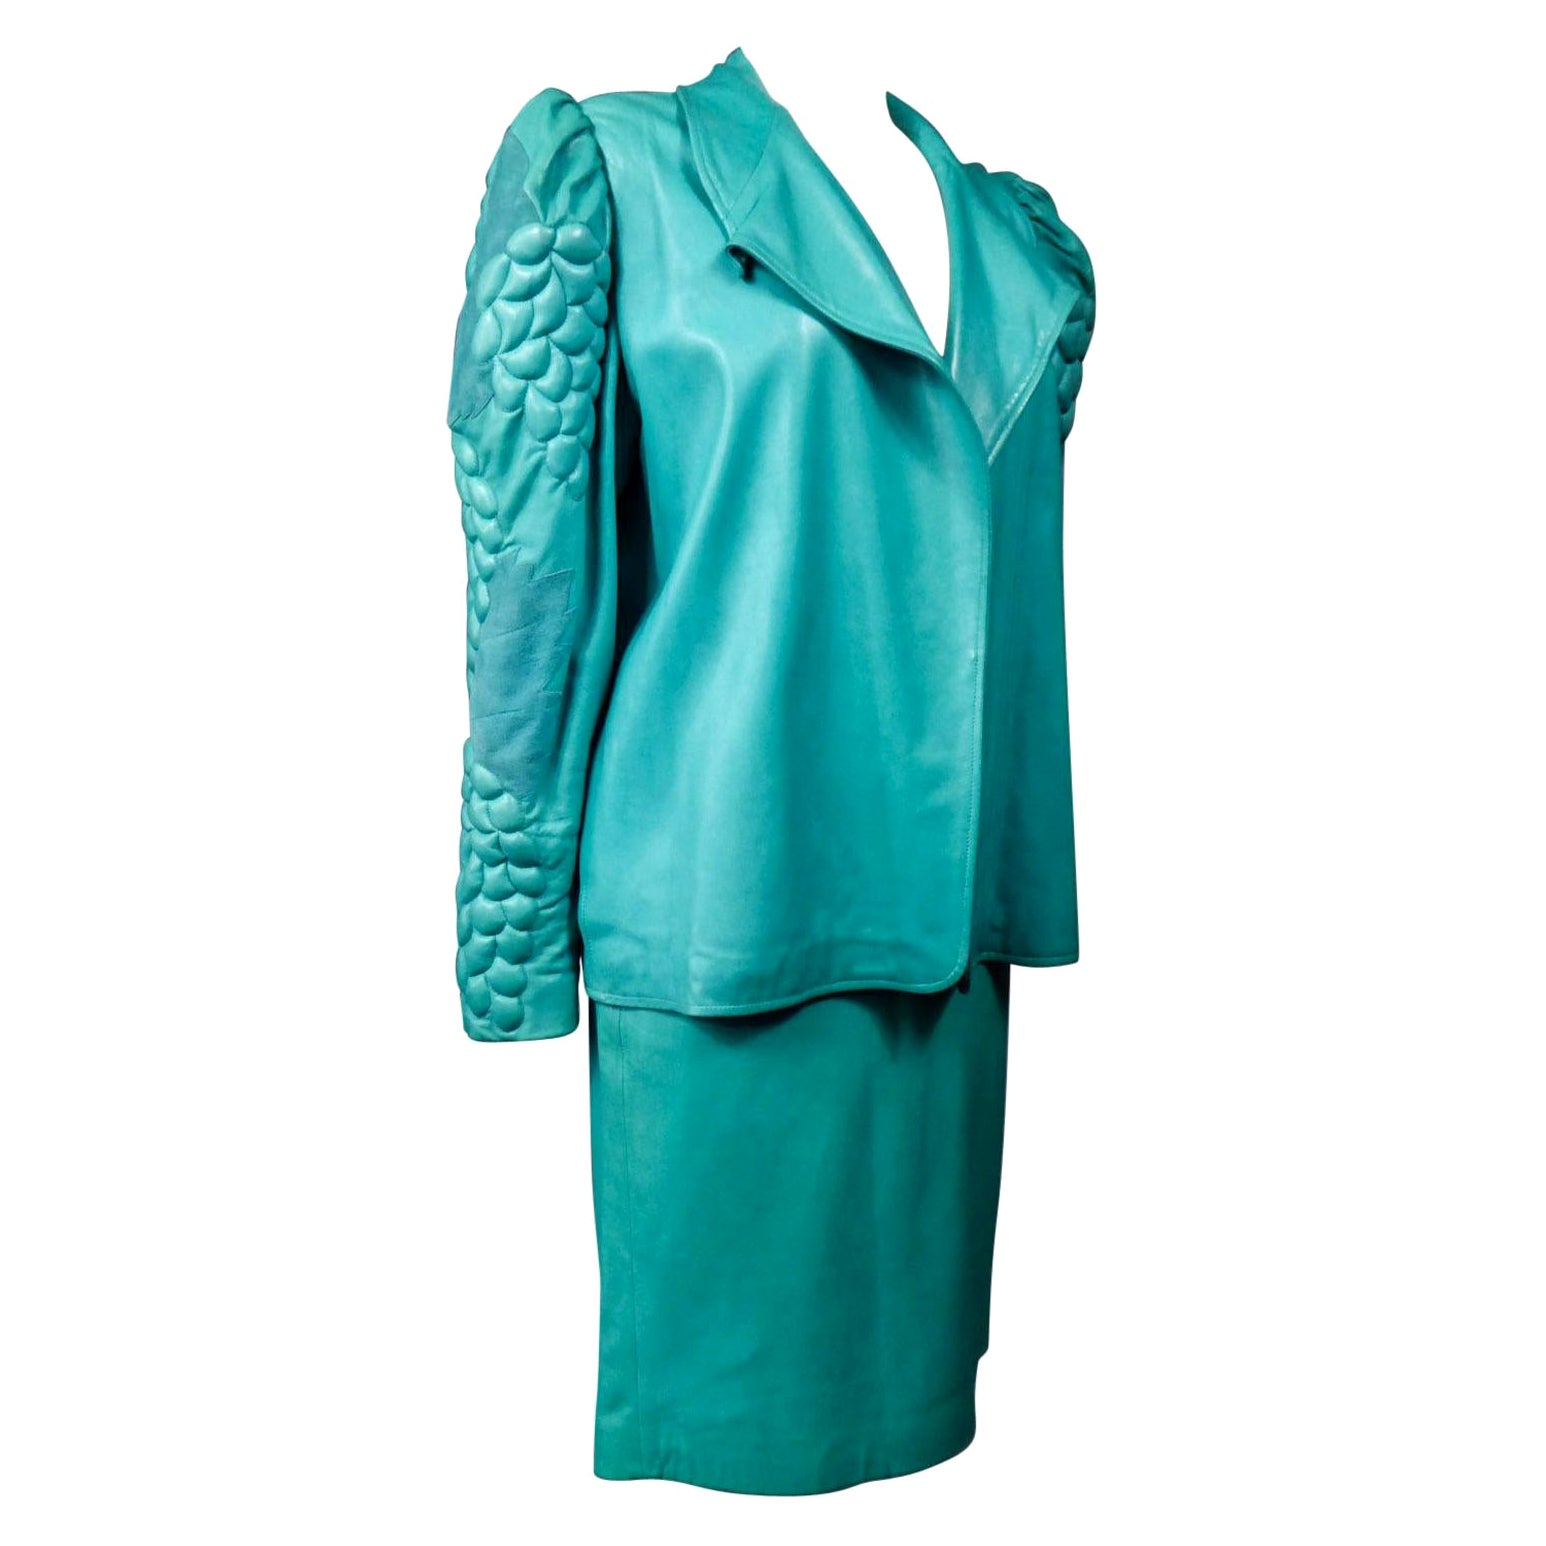 A Jean-Claude Jitrois Skirt and Jacket in Turquoise Leather - Fall 1985/1986 